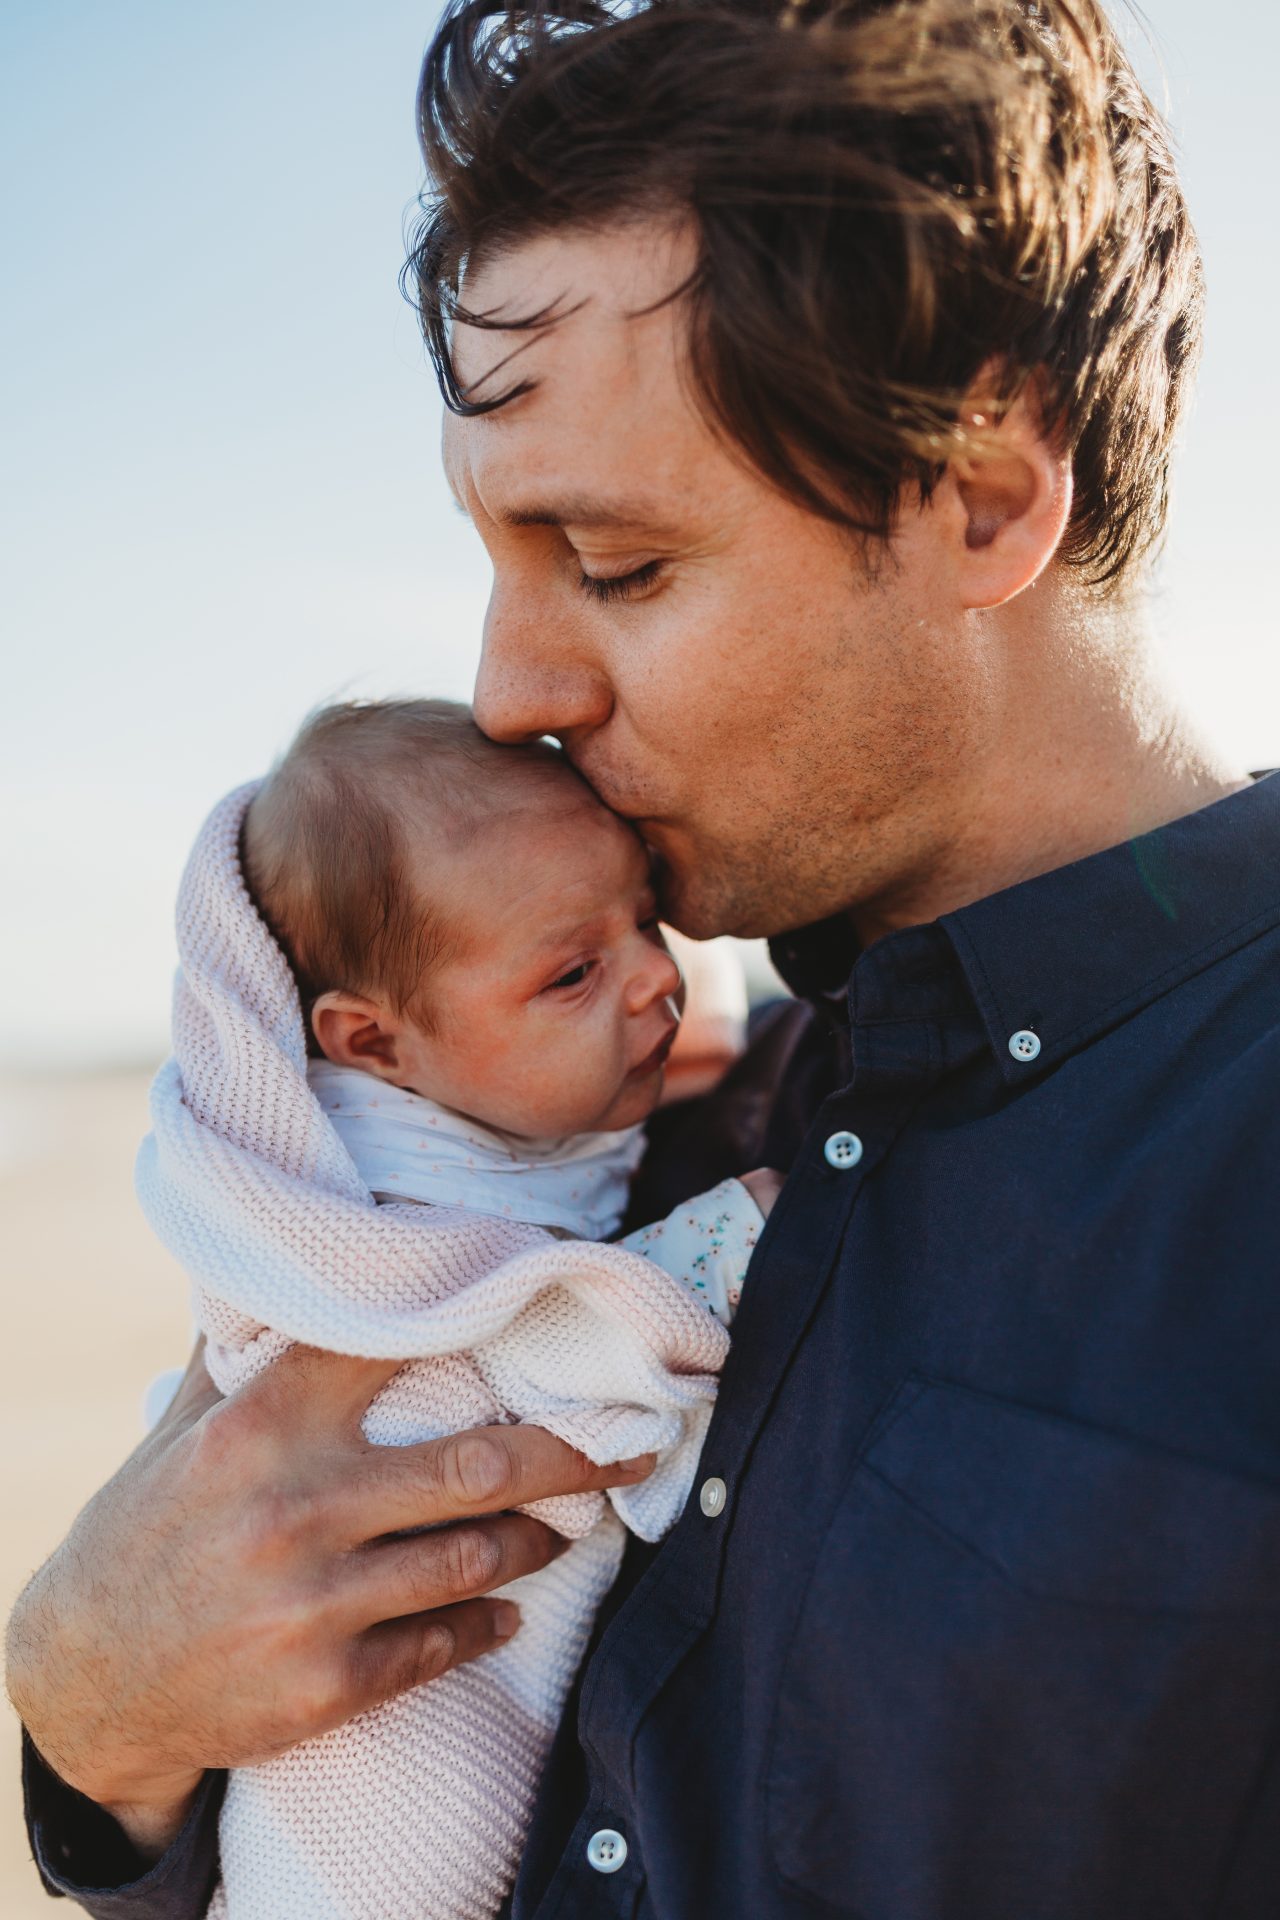 Man holding baby daughter close and kissing her head